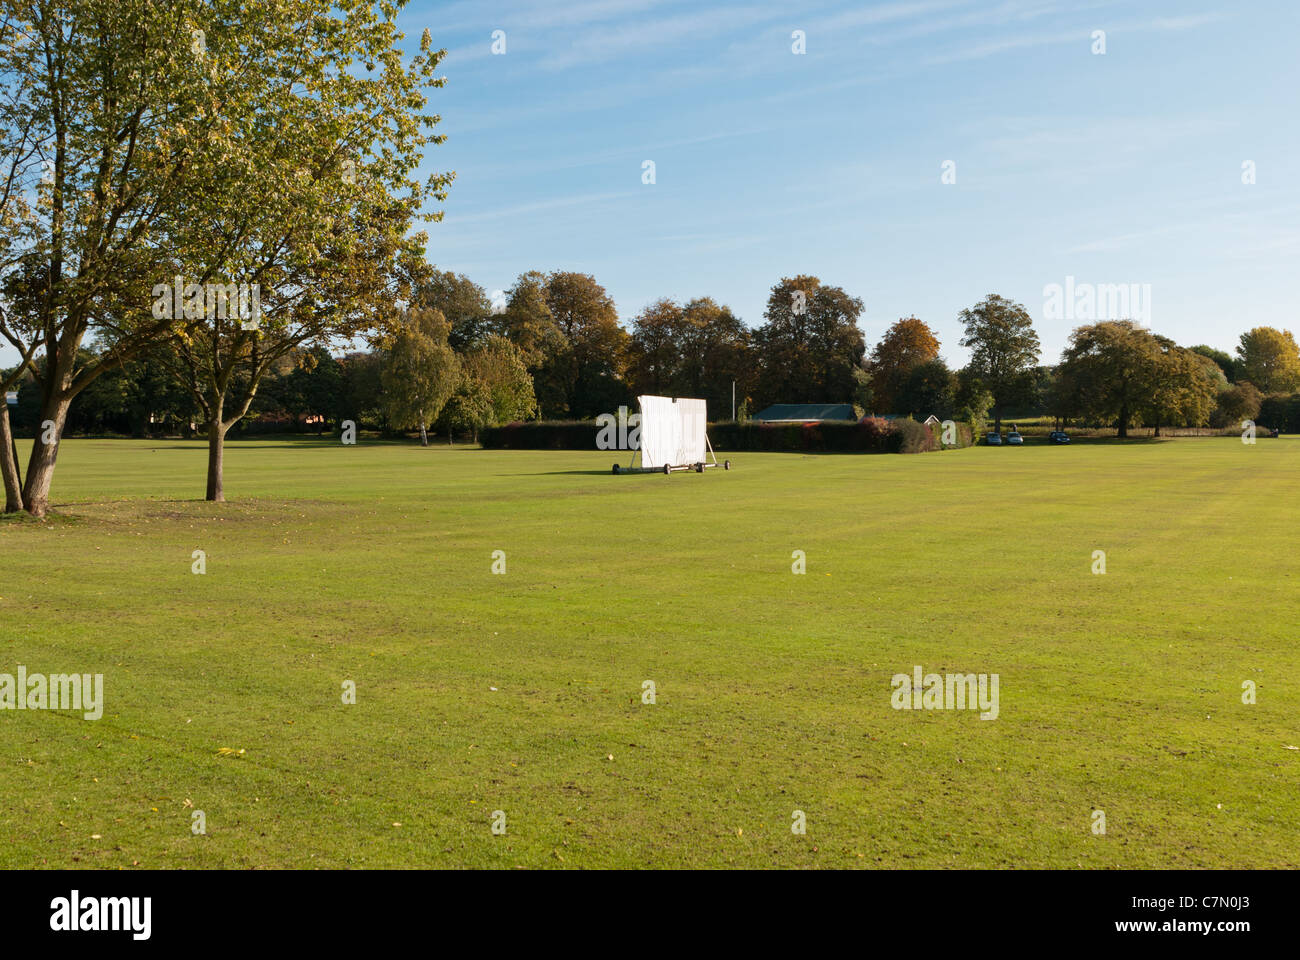 Cricket pitch on The Bath Grounds in Ashby de la Zouch, Leicestershire, UK Stock Photo